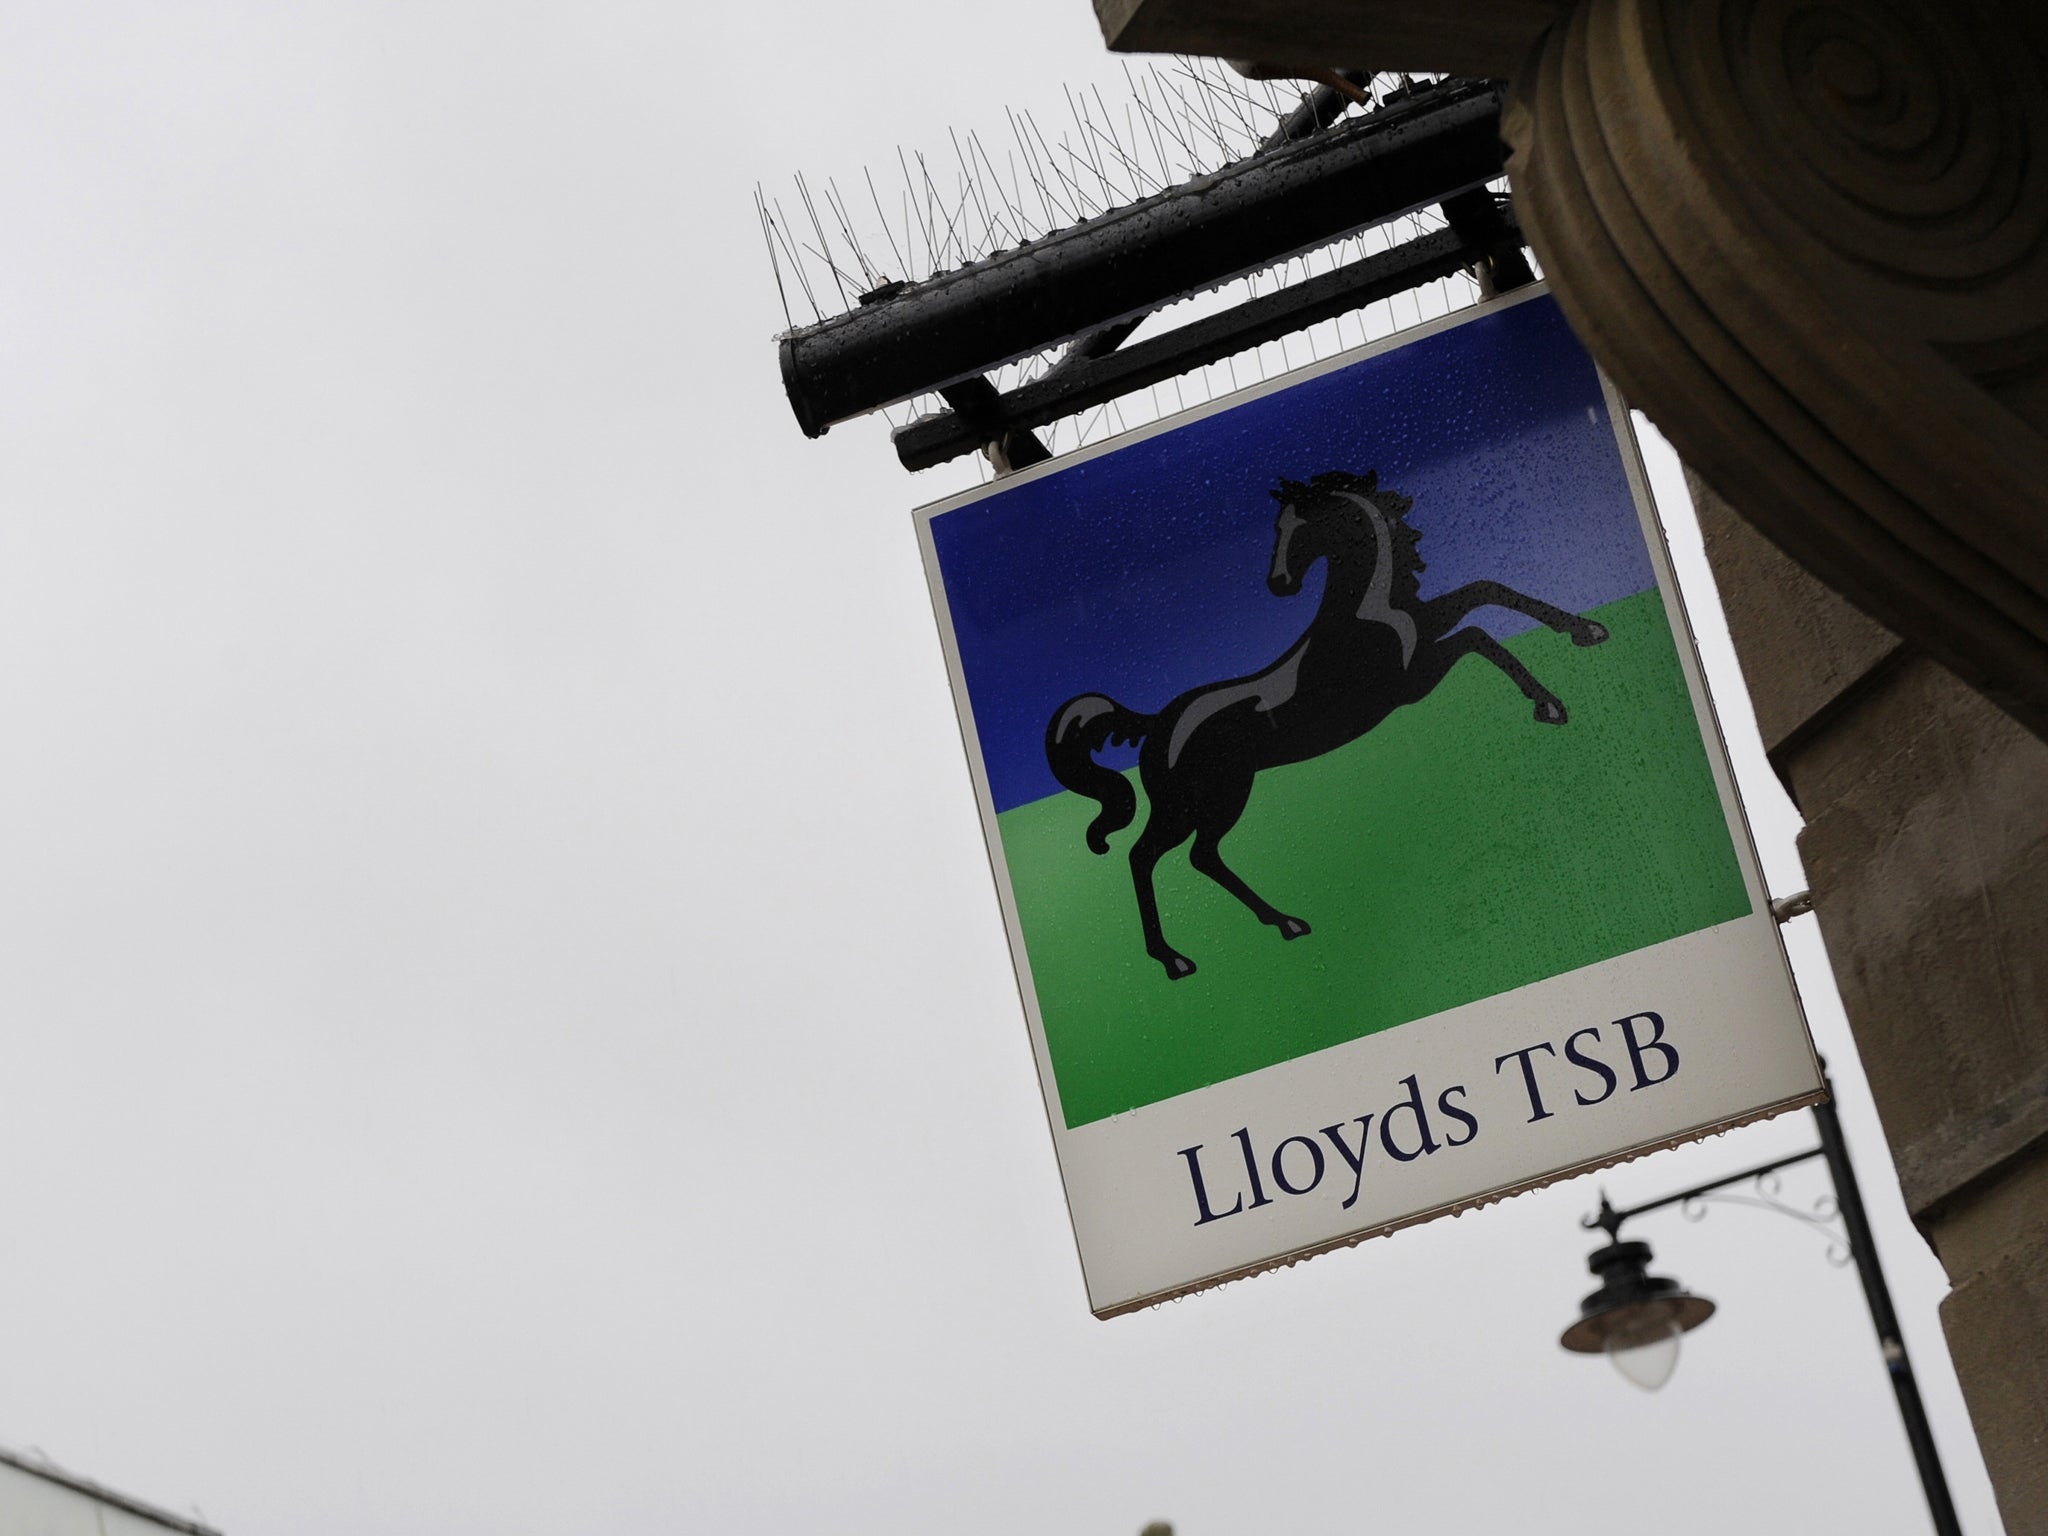 Unite union said Lloyds Banking Group has announced almost 2,750 job losses since the start of the year